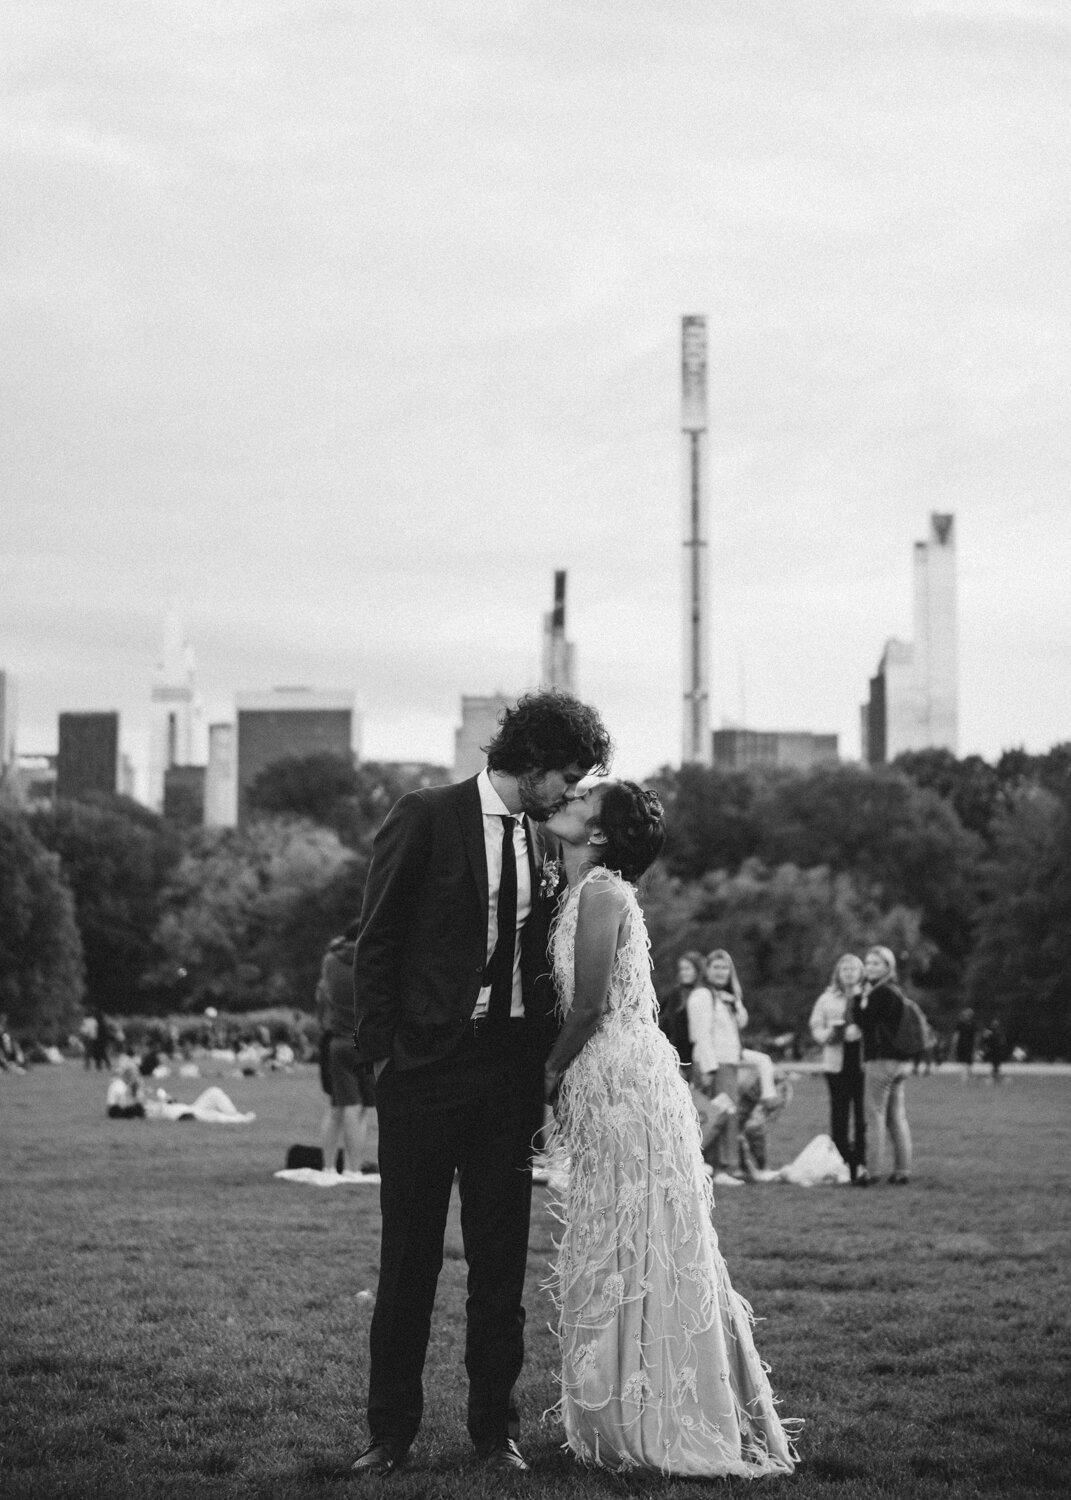 Bride and groom kiss standing on the grass in Central Park. Trees, Manhattan buildings, and park-goers are visible in the background.

Central Park Wedding Photography. Williamsburg Bridge Bridal Portraits. Luxury NYC Wedding Photographer. Manhattan Micro Wedding.